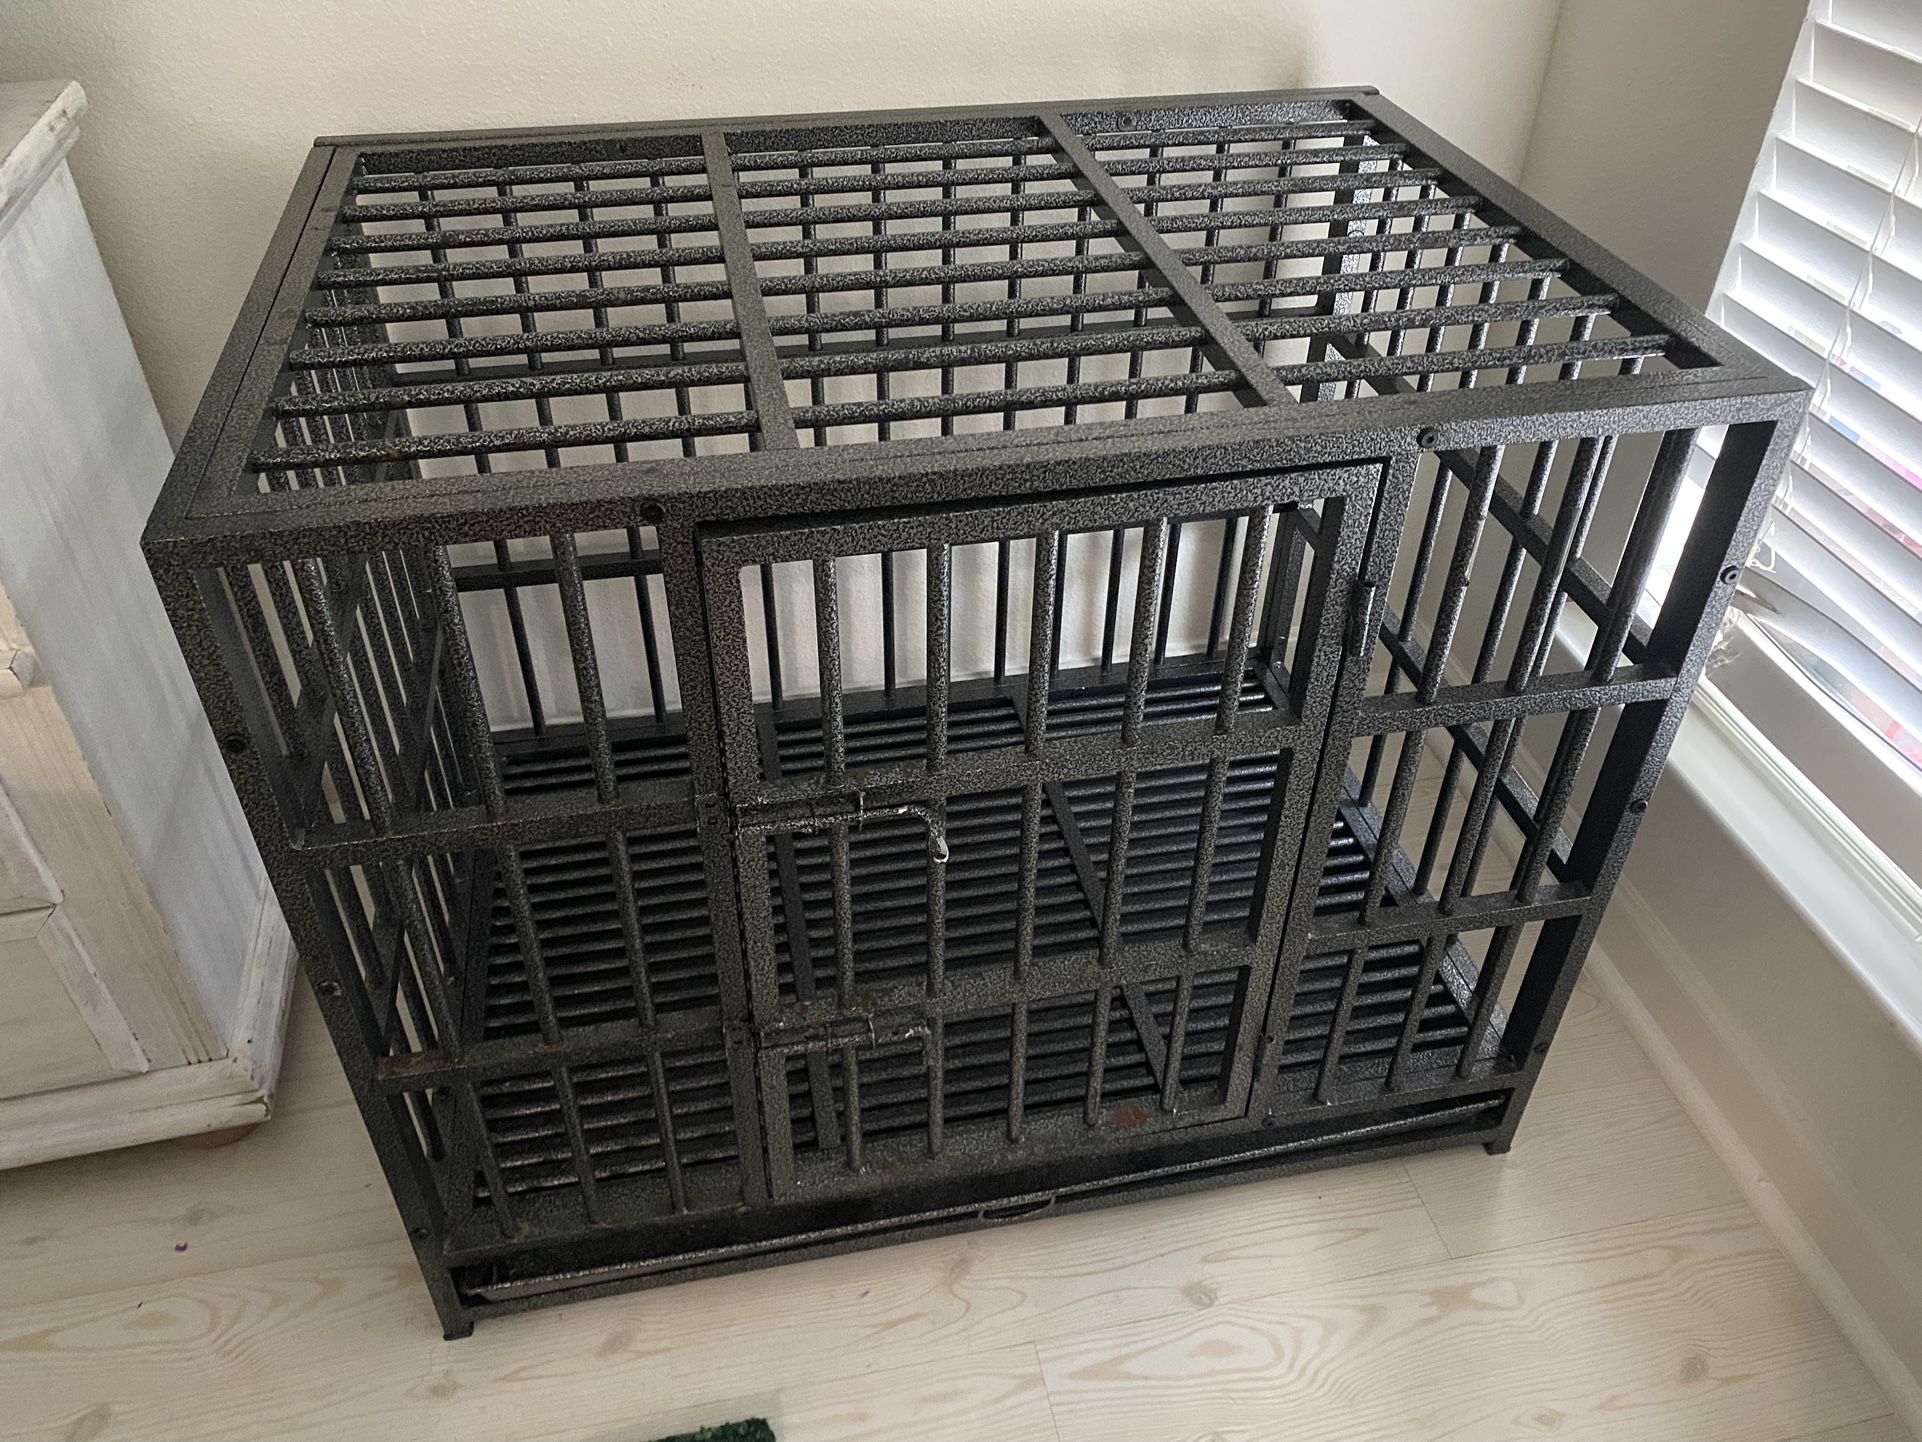 ProSelect 37” Indestructible Dog Crate Kennel 